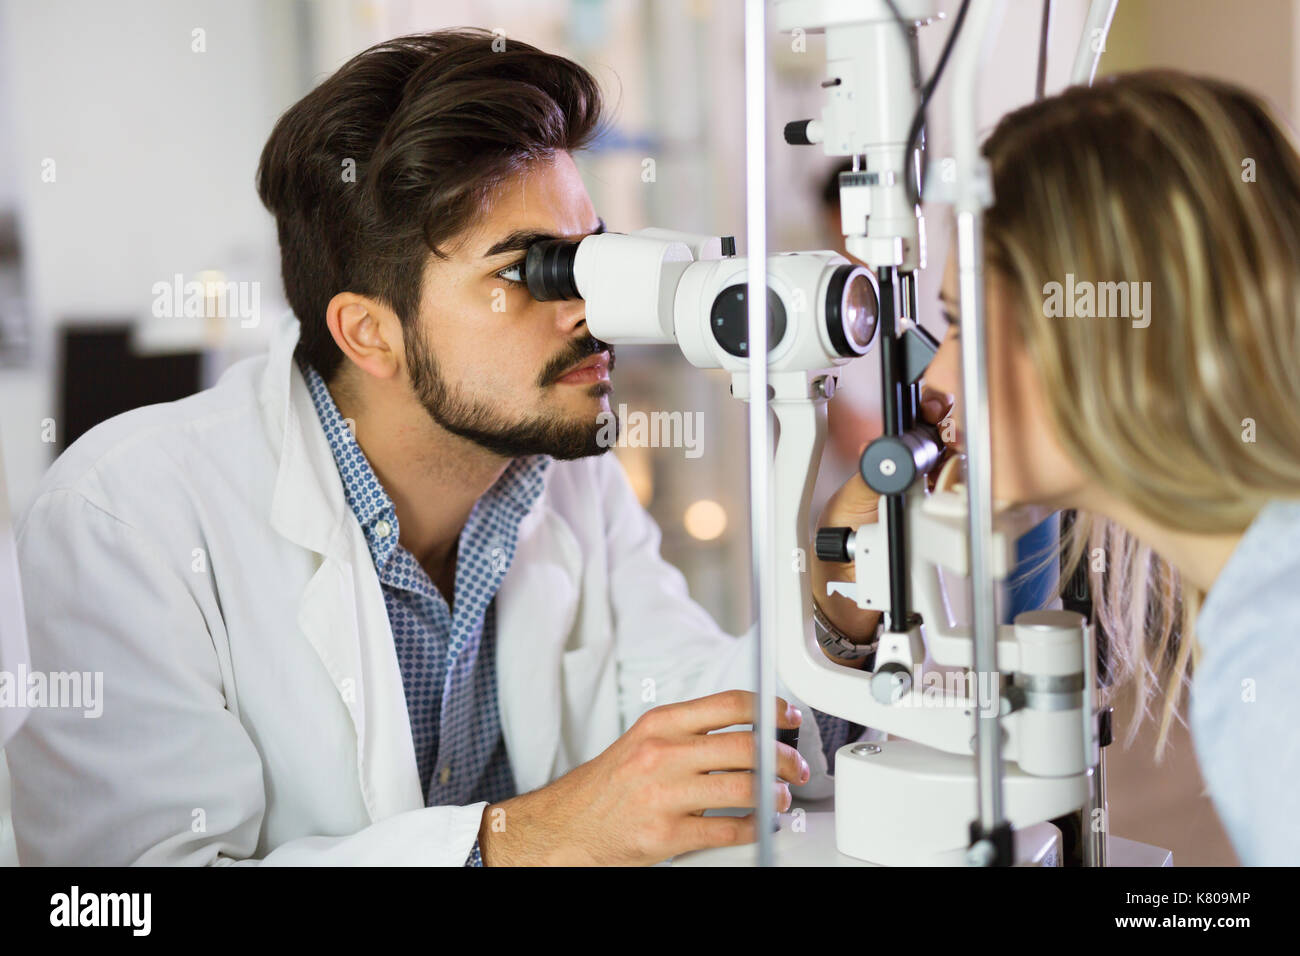 Checking eyesight in a clinic. Ophthalmology. Medicine and health concept. Stock Photo